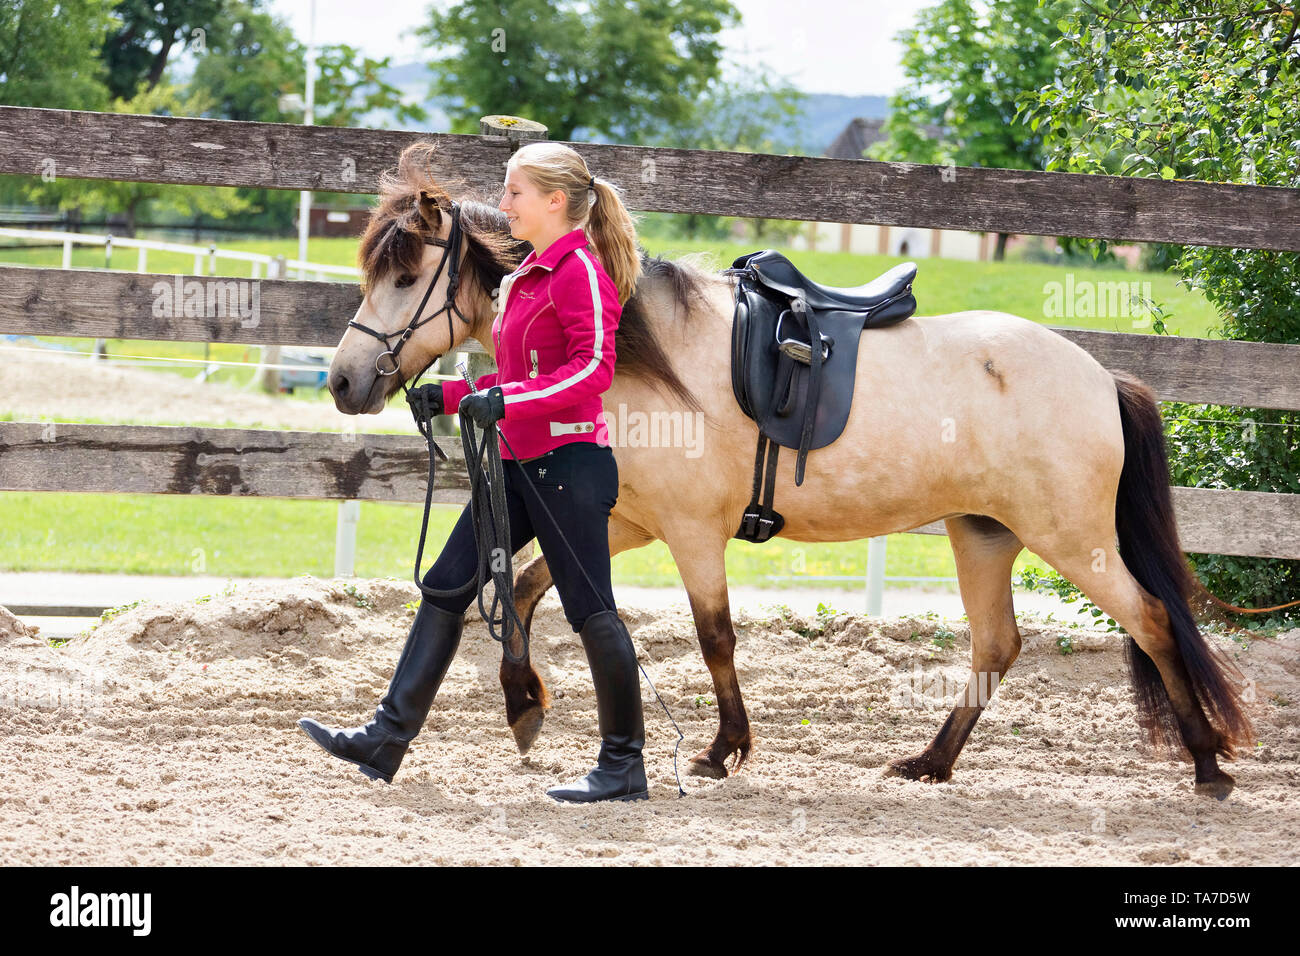 Icelandic Horse. Dun horse being taught to be lead with bridle and saddle. Stock Photo